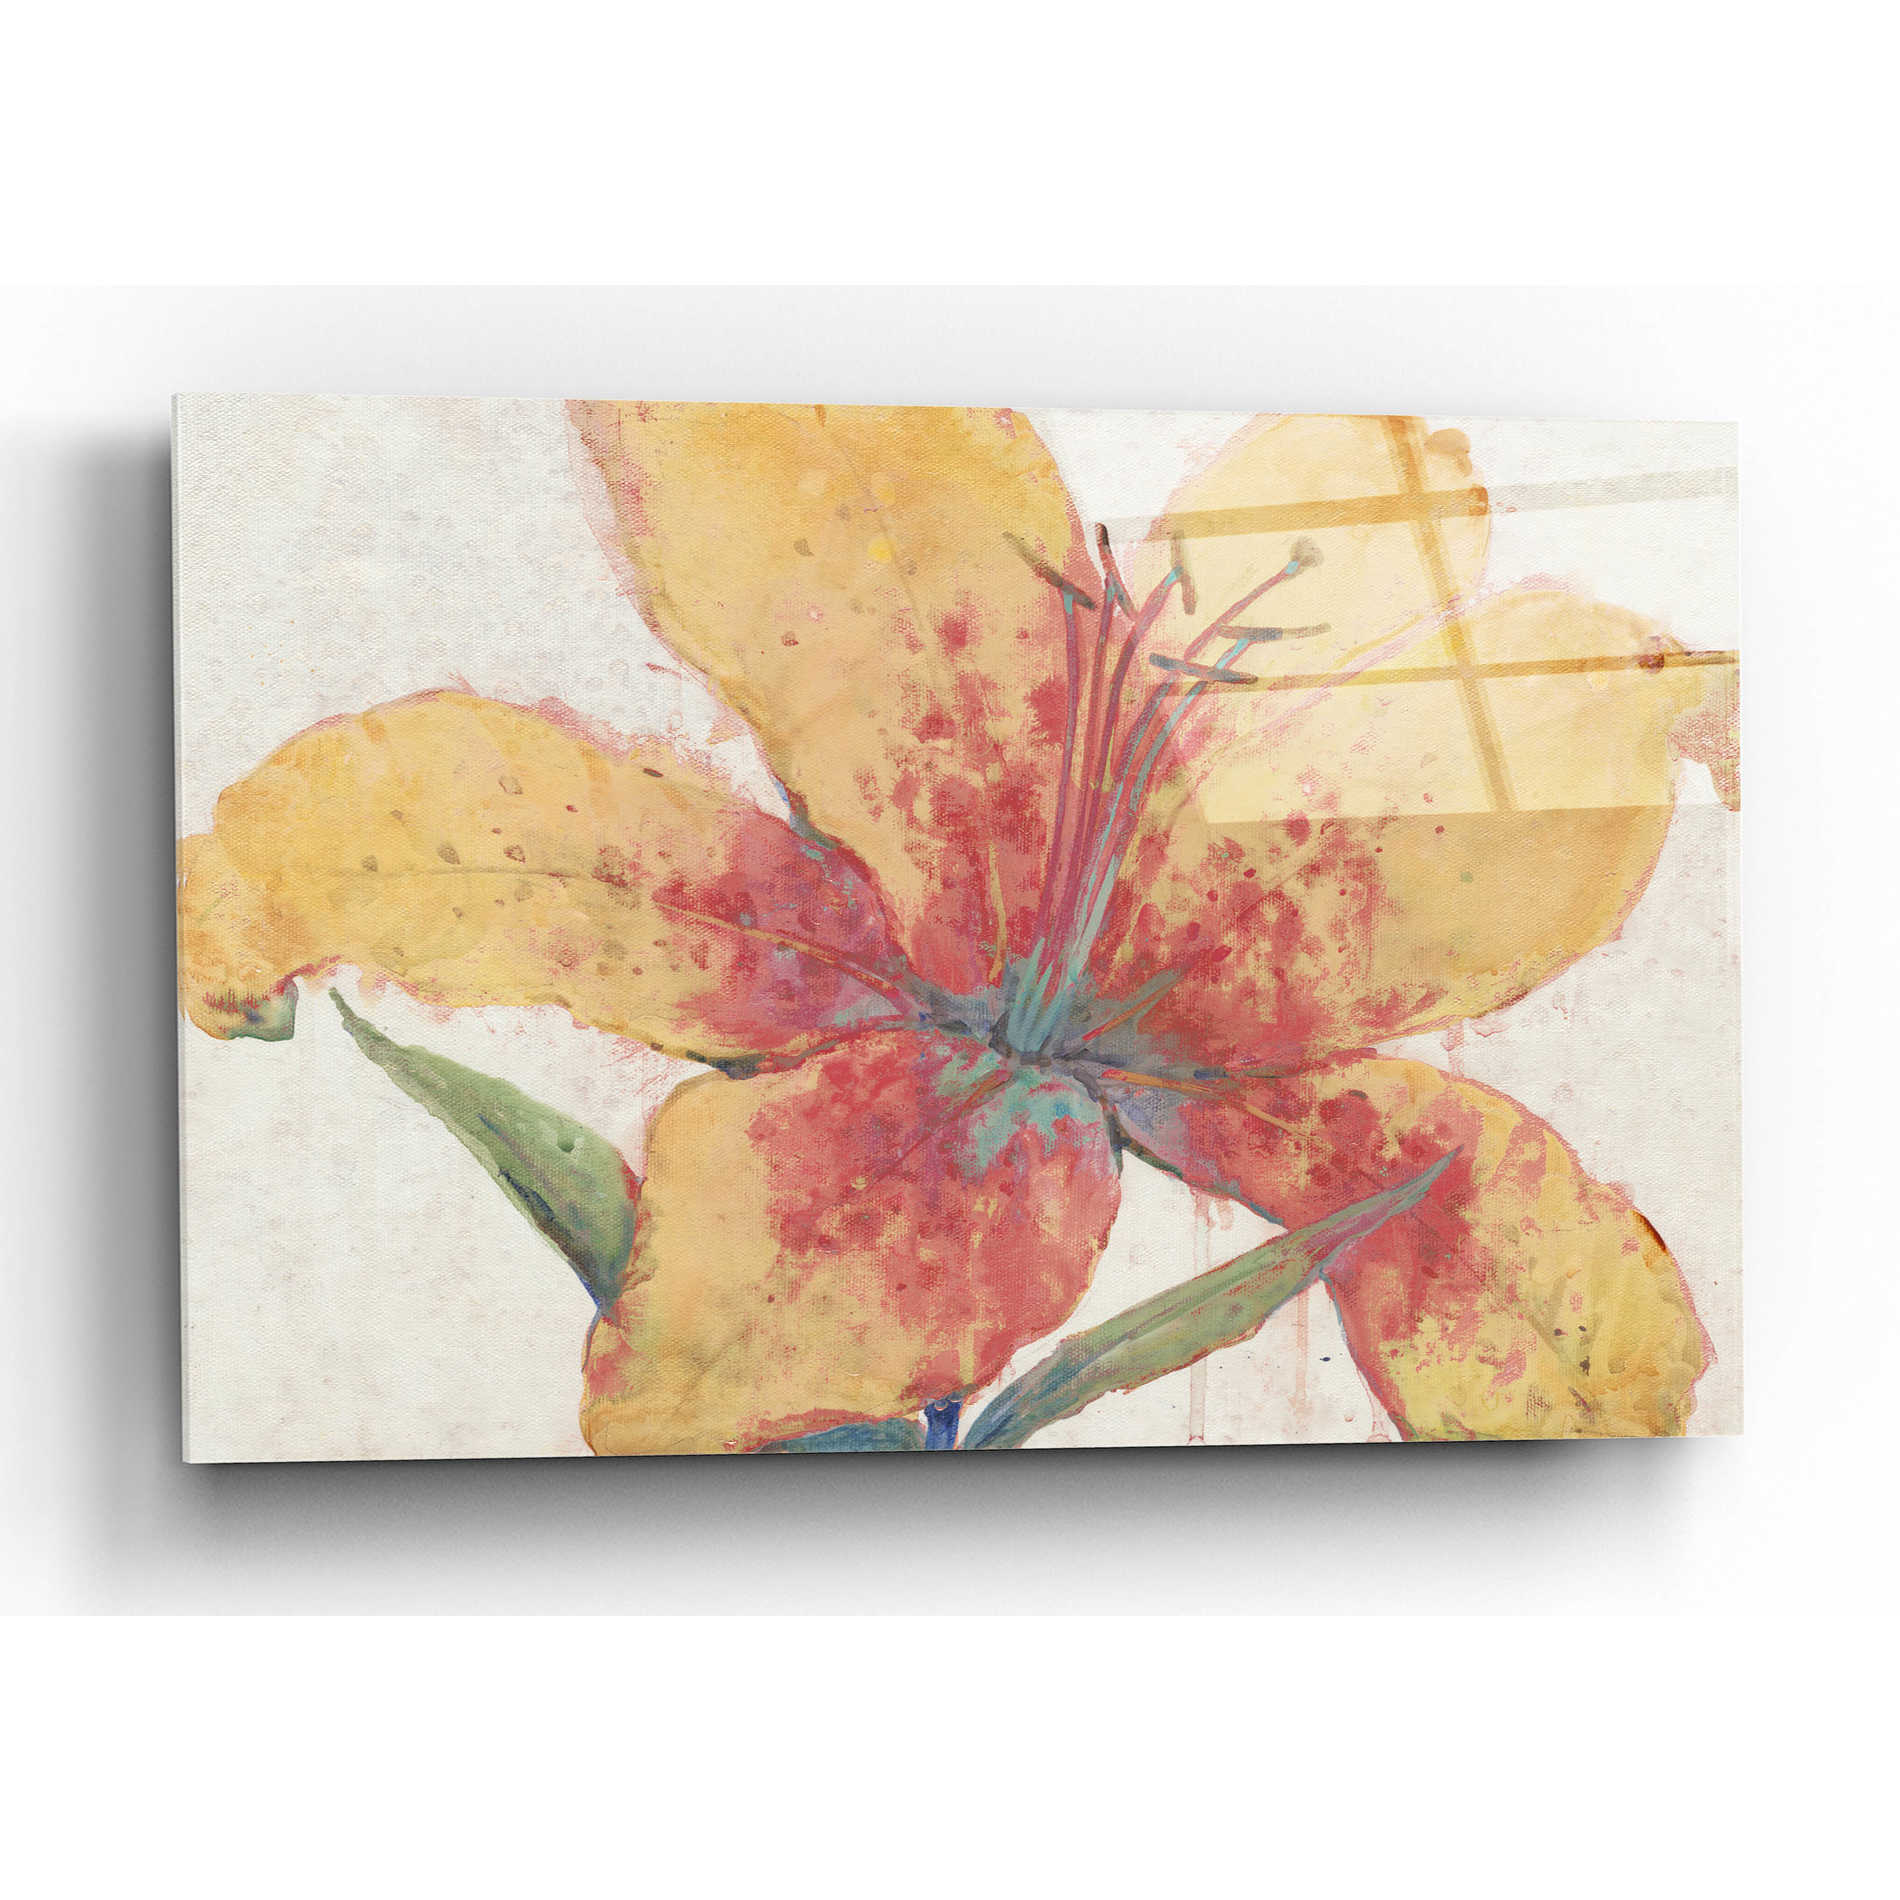 Epic Art 'Blooming Lily' by Tim O'Toole, Acrylic Glass Wall Art,16x12